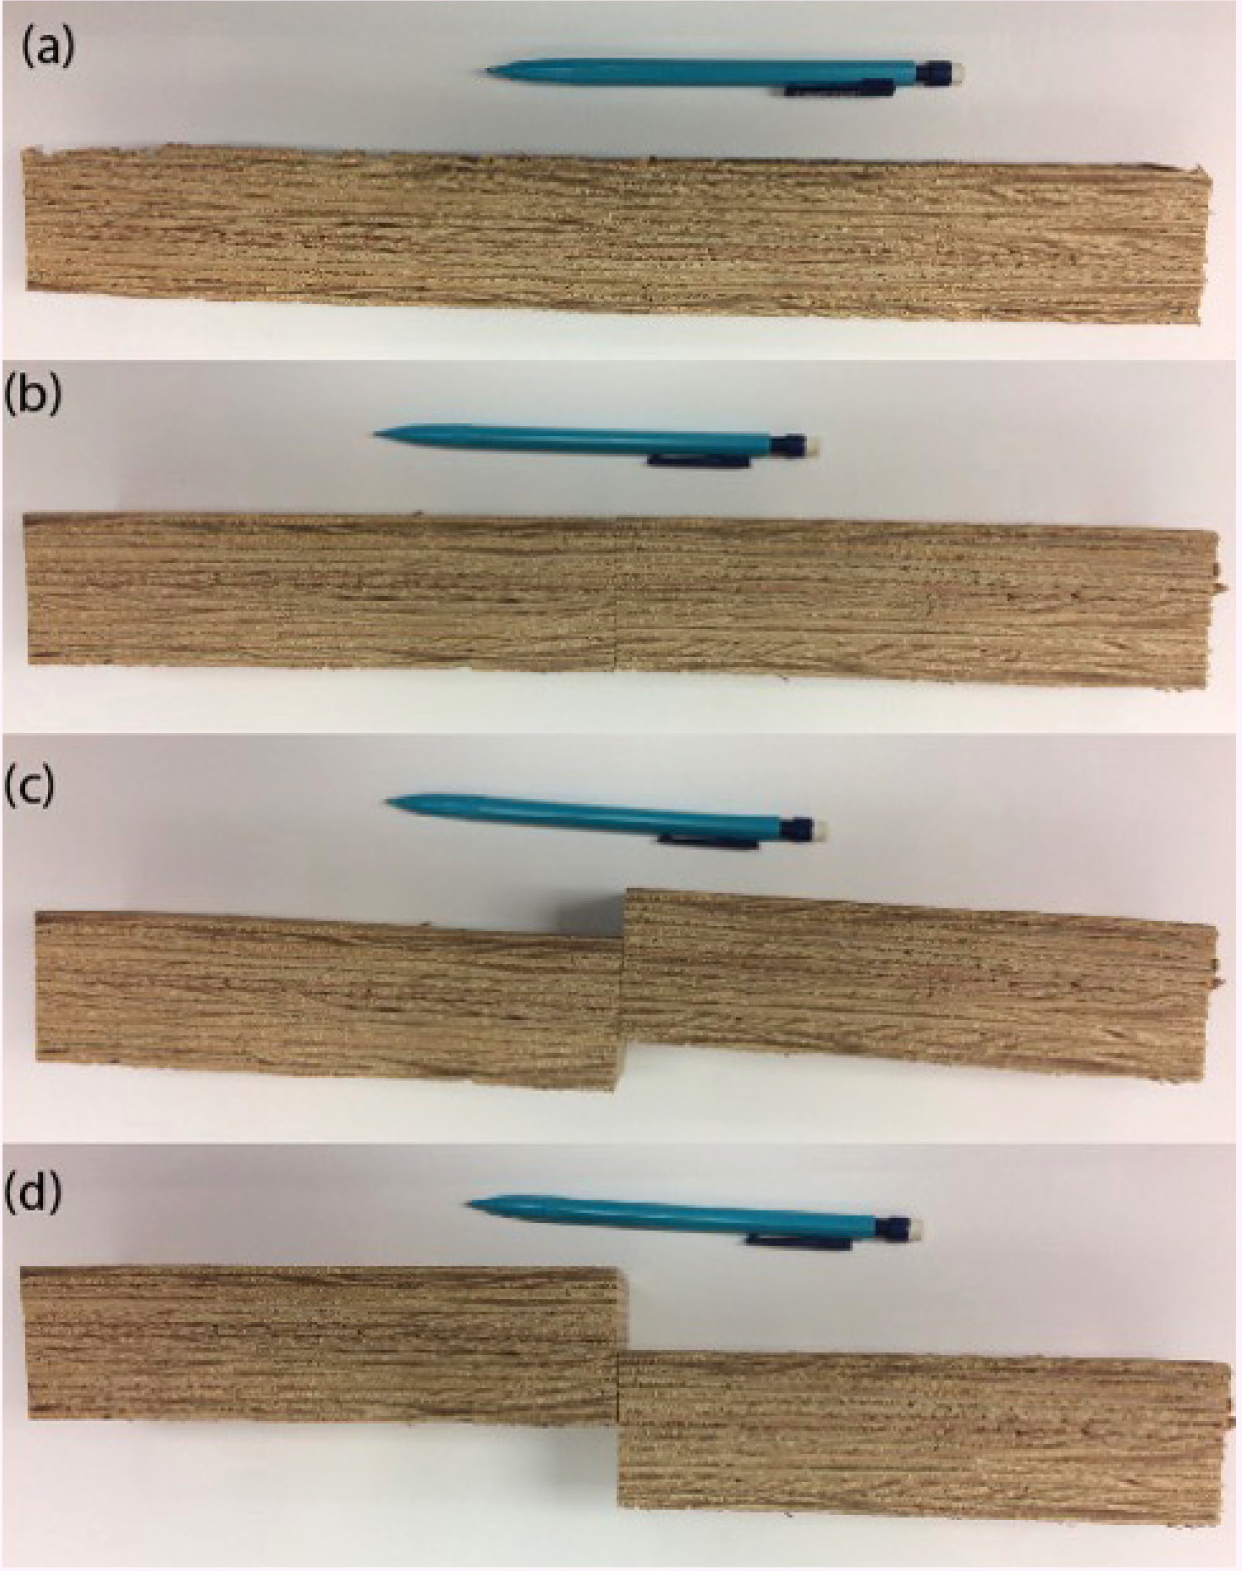 Figure 6 Use of a block of plywood to represent sedimentary layers.  Note. (a) uncut or intact plywood; (b) cut or “jointed” plywood with no displacement; (c) faulted plywood representing left-lateral fault; and (d) faulted plywood representing right-lateral fault.